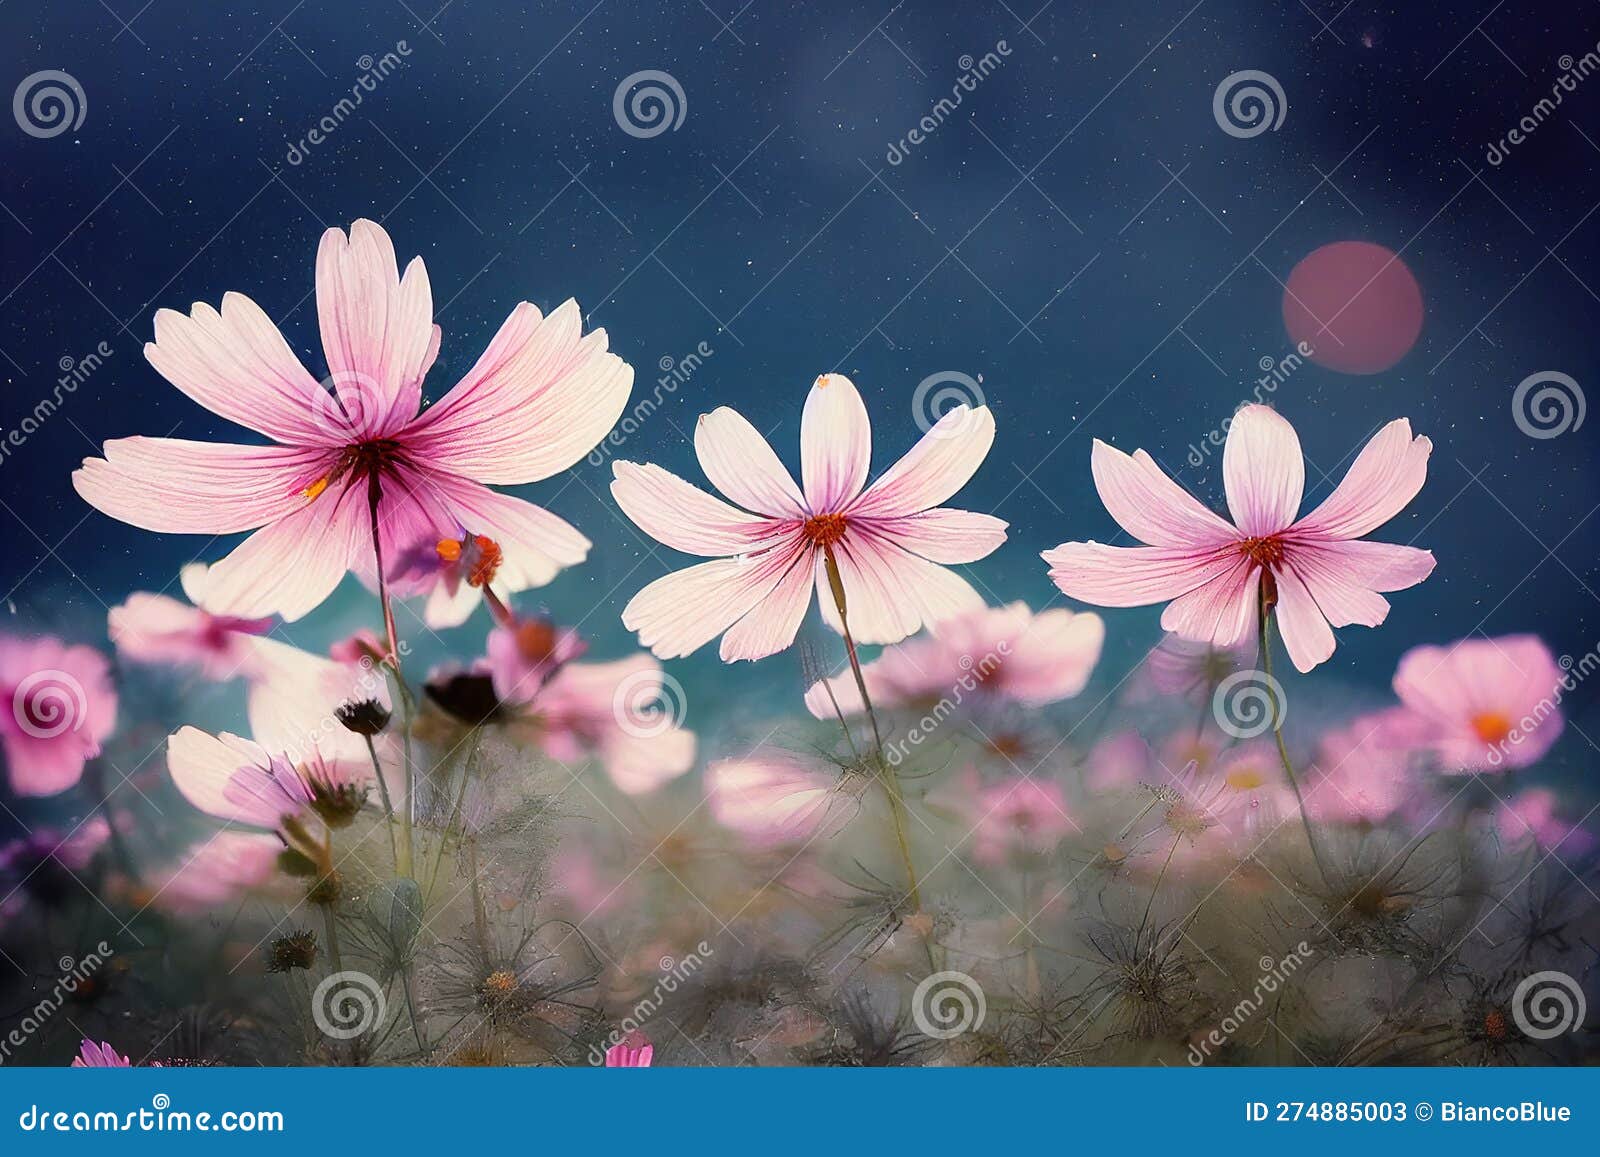 Ravishing Closeup Flower Scenery in Natural Landscape with Starry Night ...